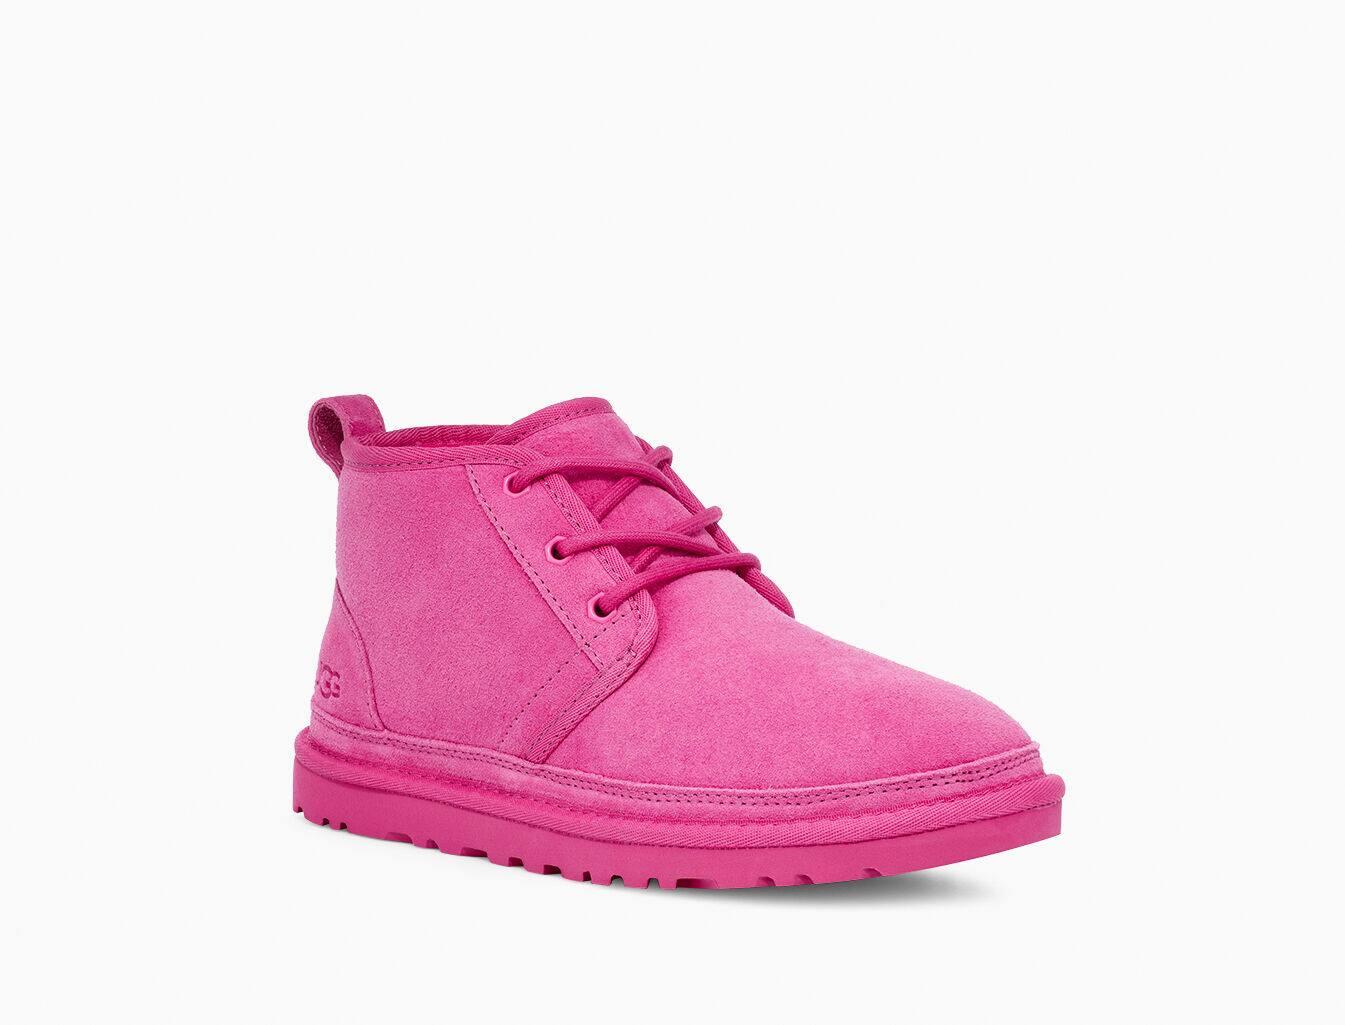 UGG Wool Neumel Boot in Pink - Lyst